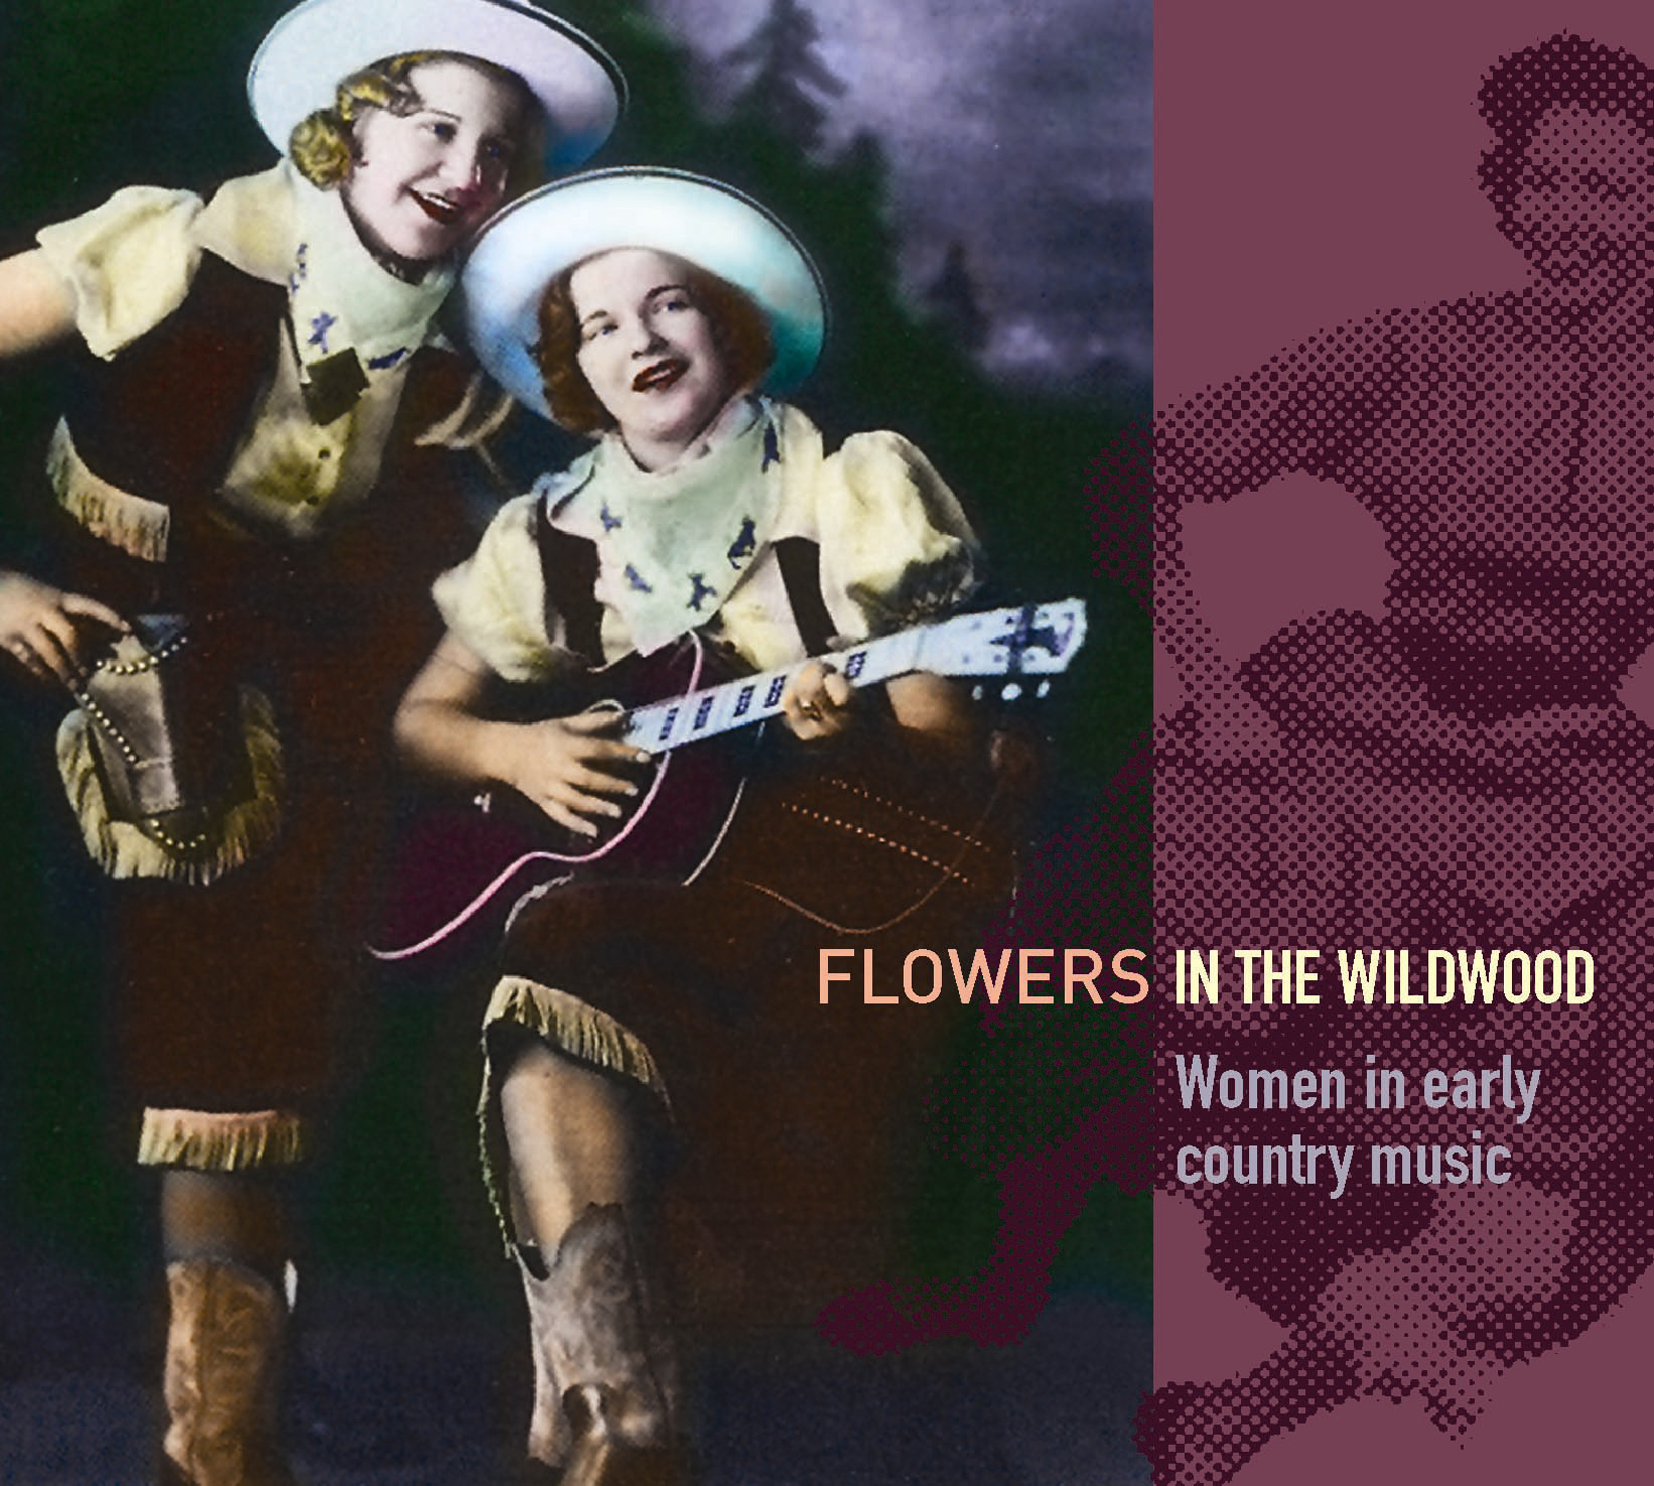 Flowers in the Wildwood - Women in early country music